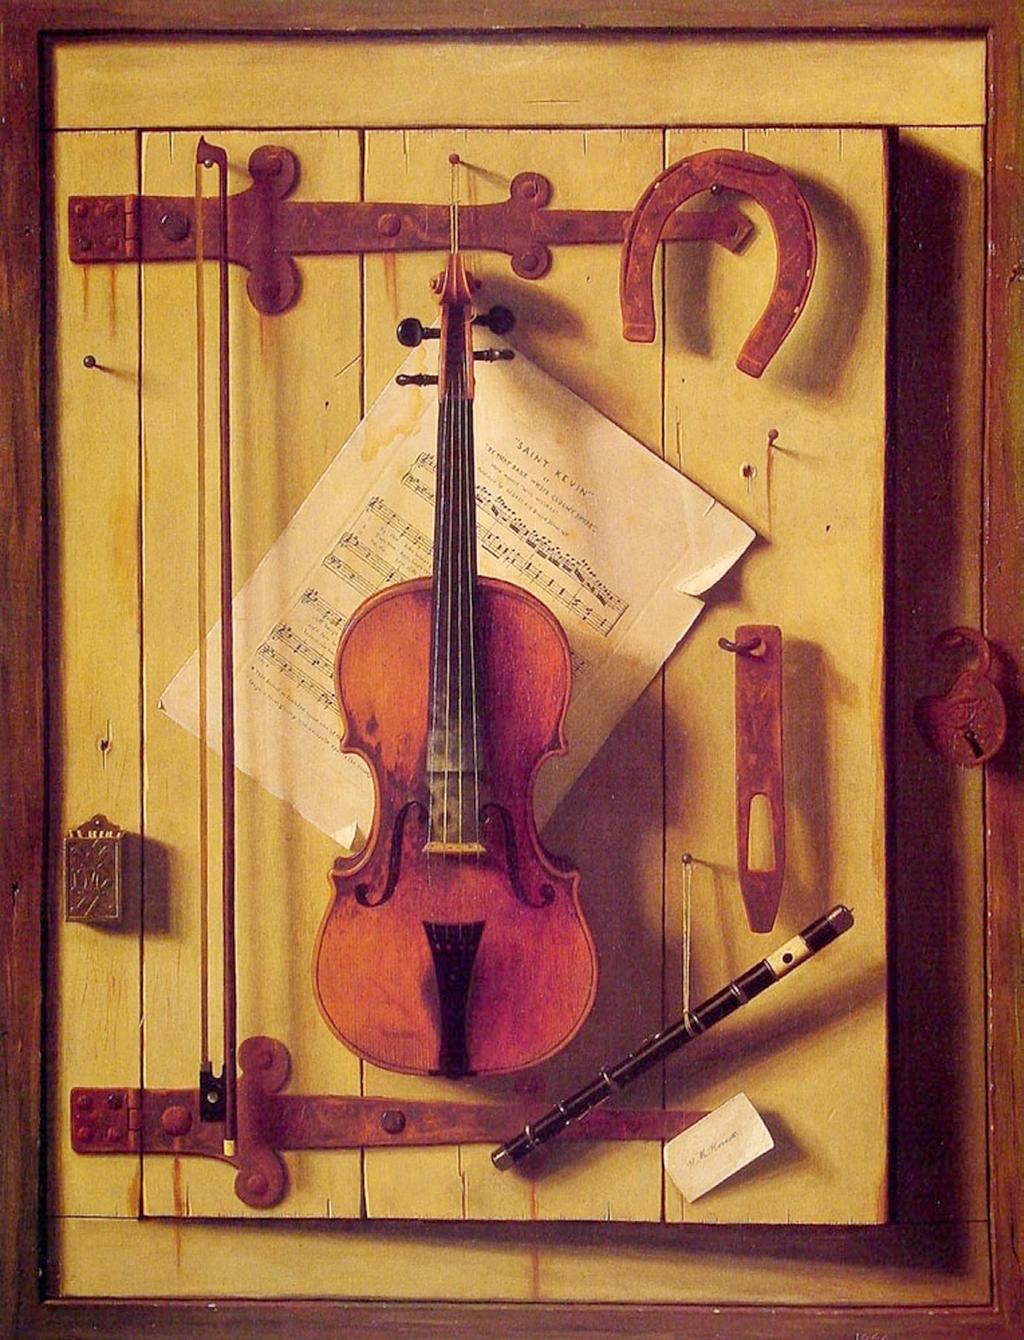 SECTION 1 ART STUDIES (continued) Violin and Music (Still life) (1888) by William Michael Harnett oil on canvas (2 76 cm) 3. Still Life Comment on the composition of this still life.